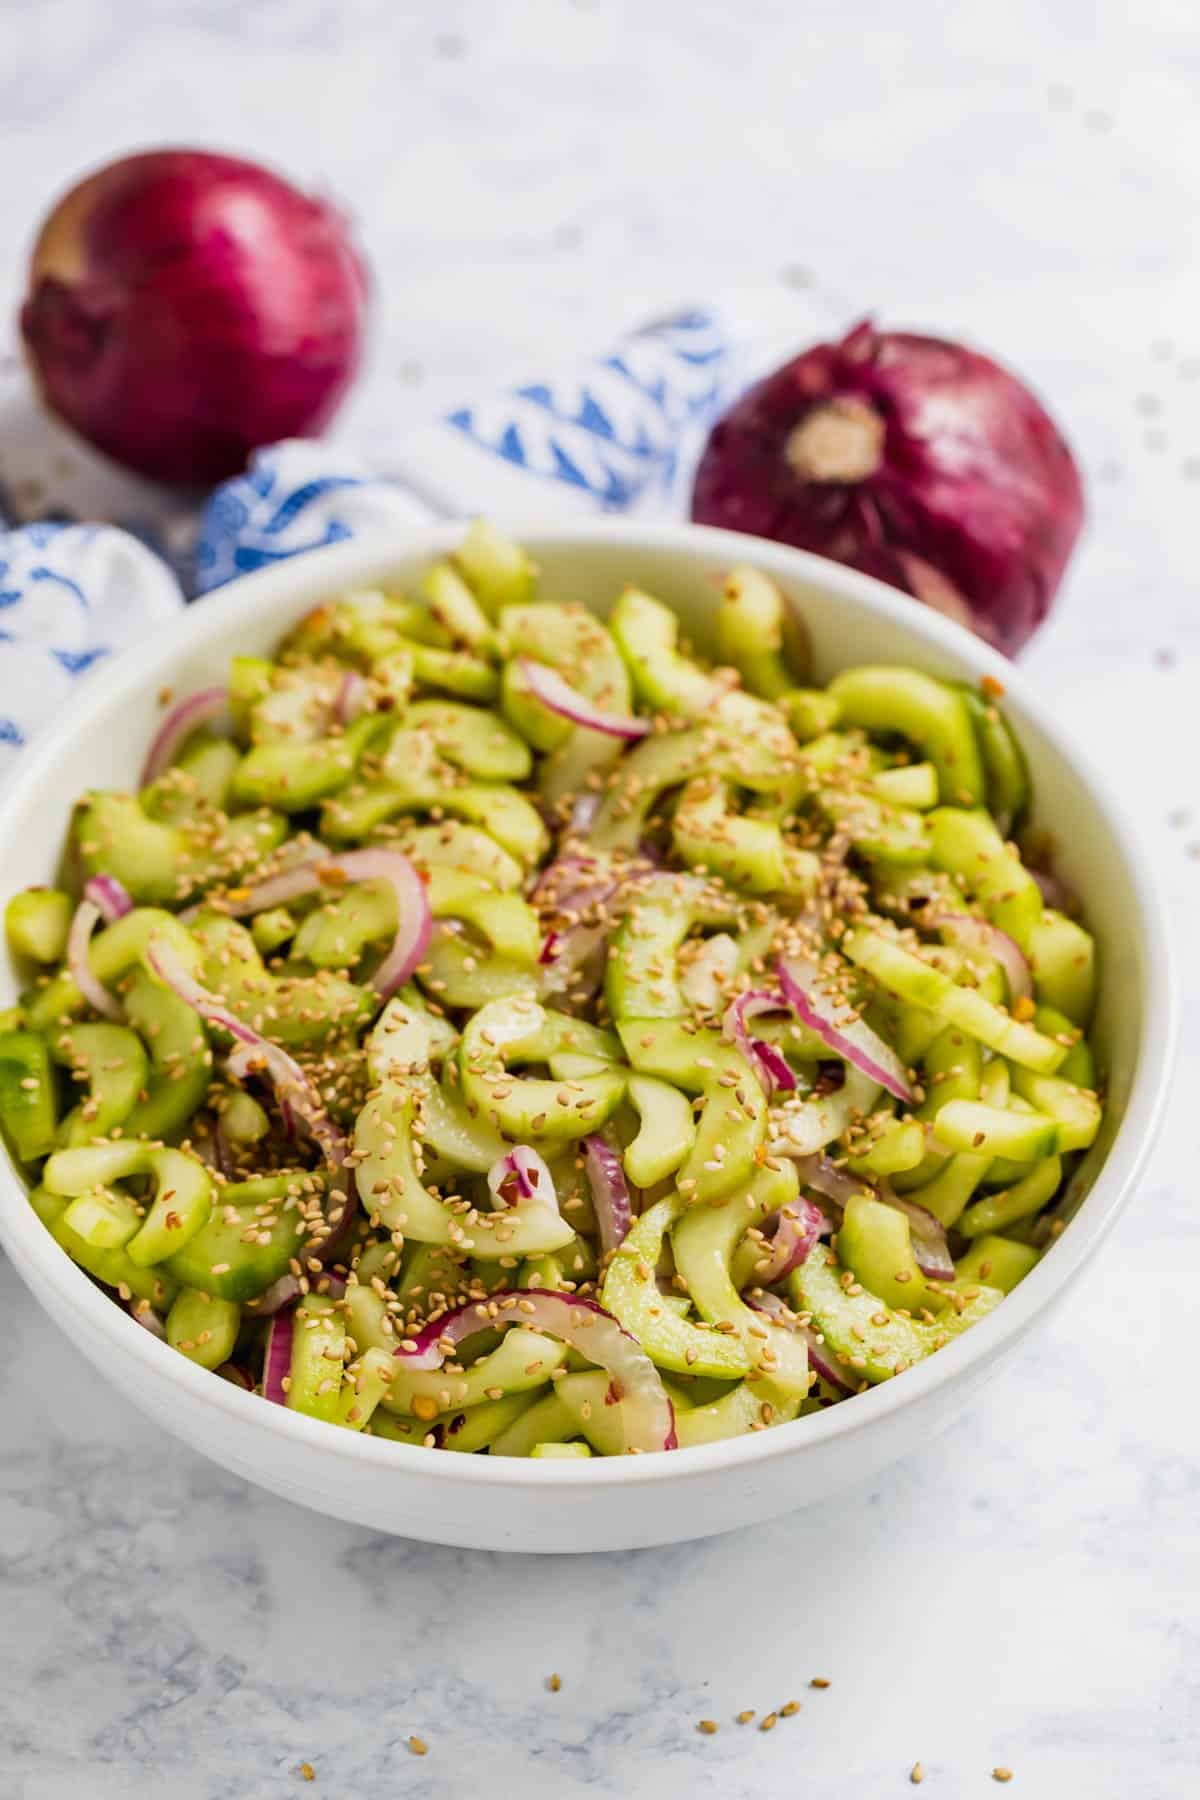 A bowl of cucumber salad with a blow towel and red onions behind it.